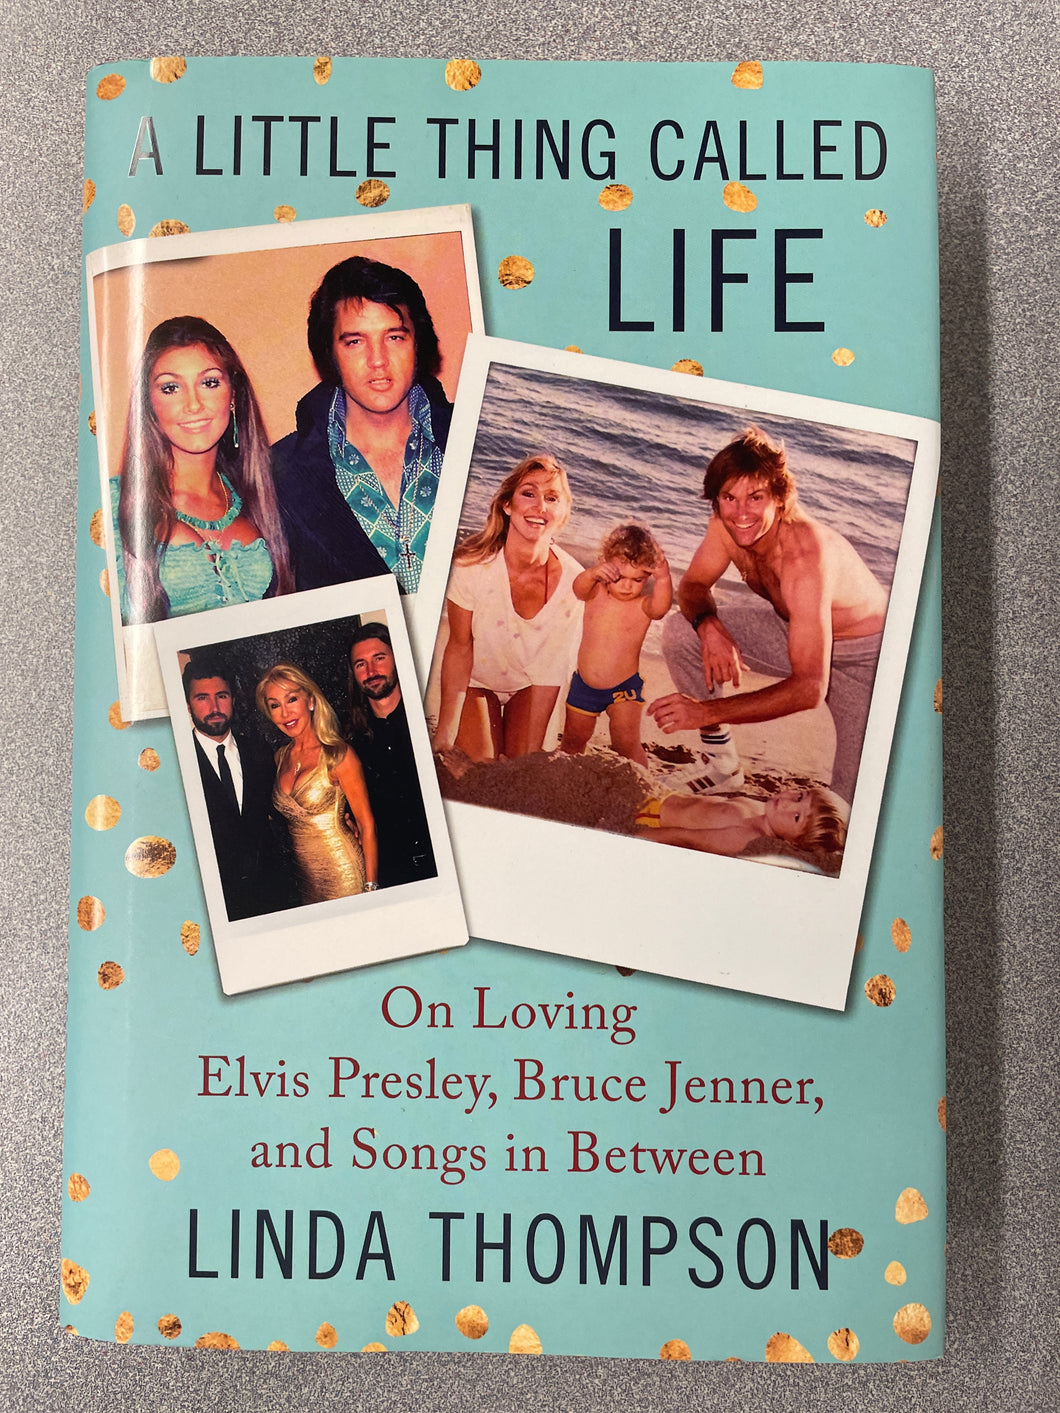 A Little Thing Called Life: On Loving Elvis Presley, Bruce Jenner and Songs in Between, Thompson, Linda (2016) EP 12/23